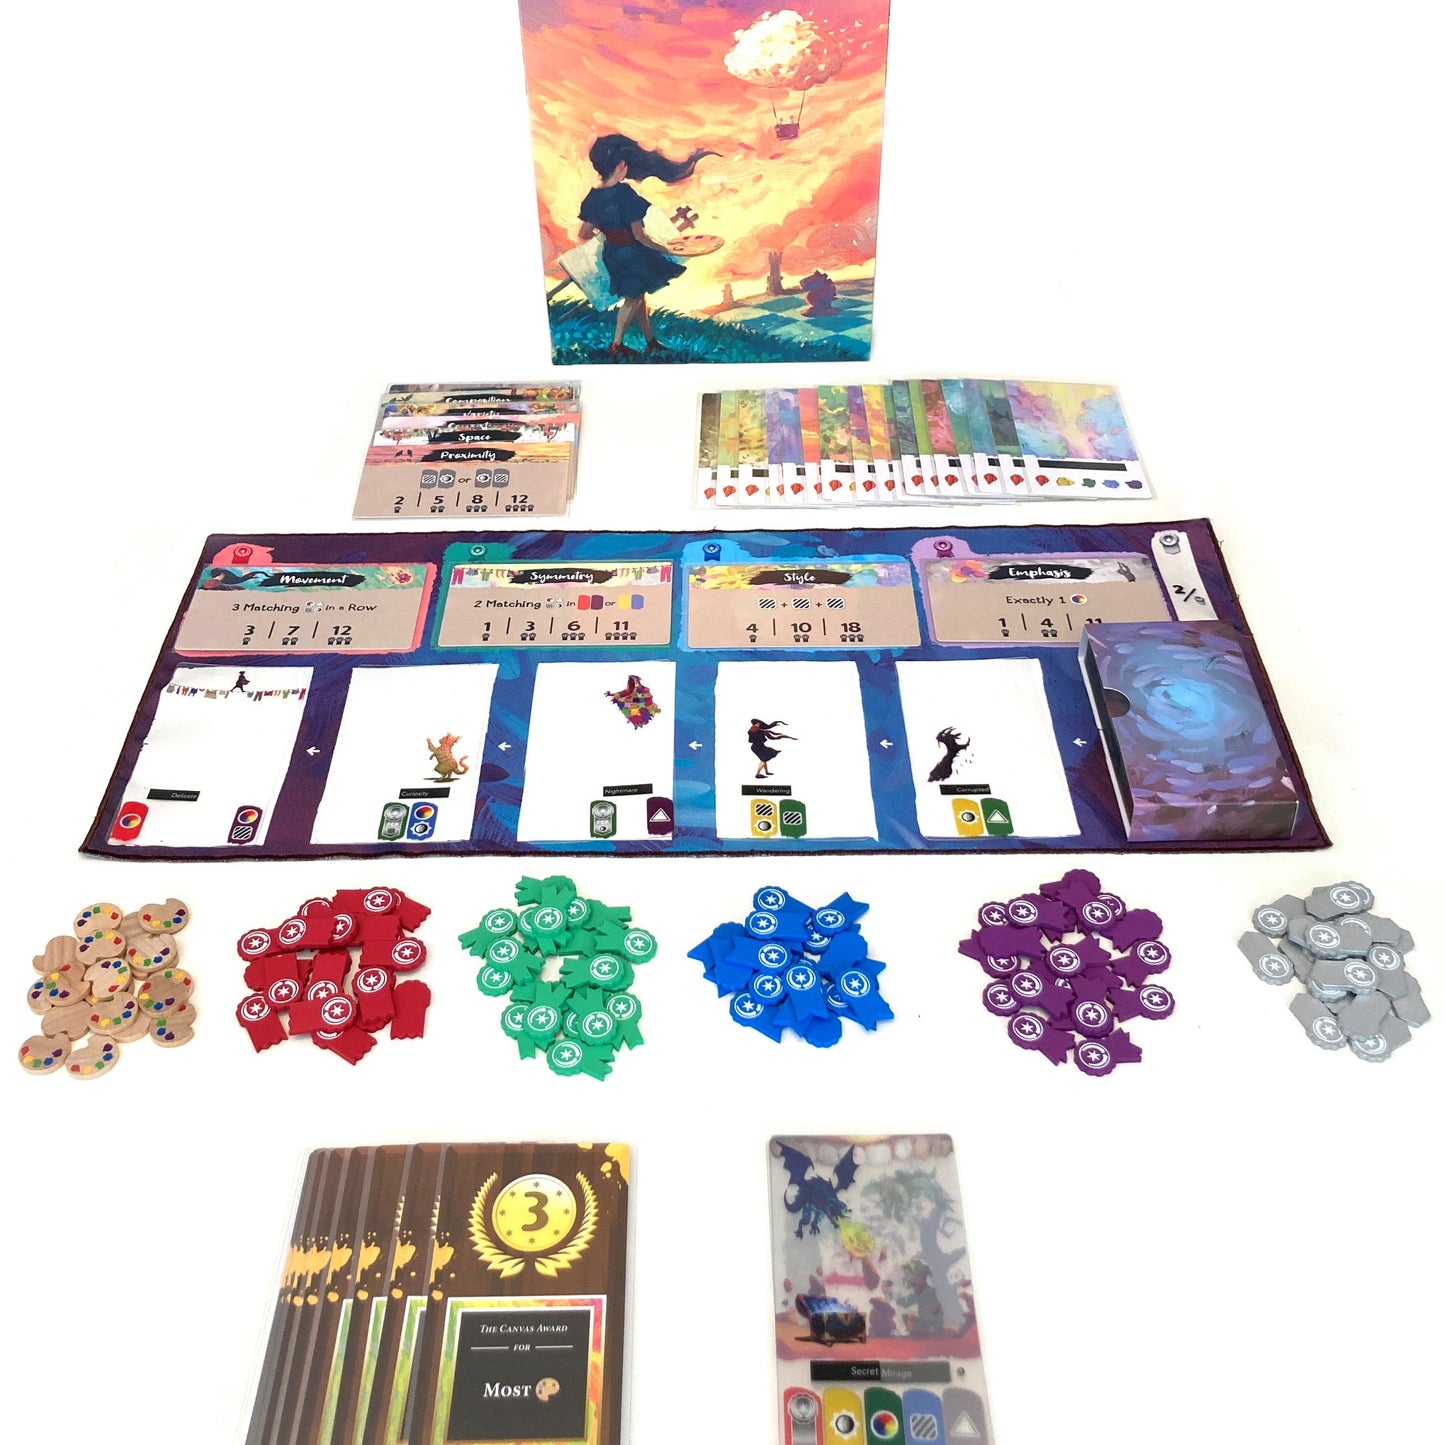 CANVAS: Reflections Expansion & Reprint by Road To Infamy — Kickstarter